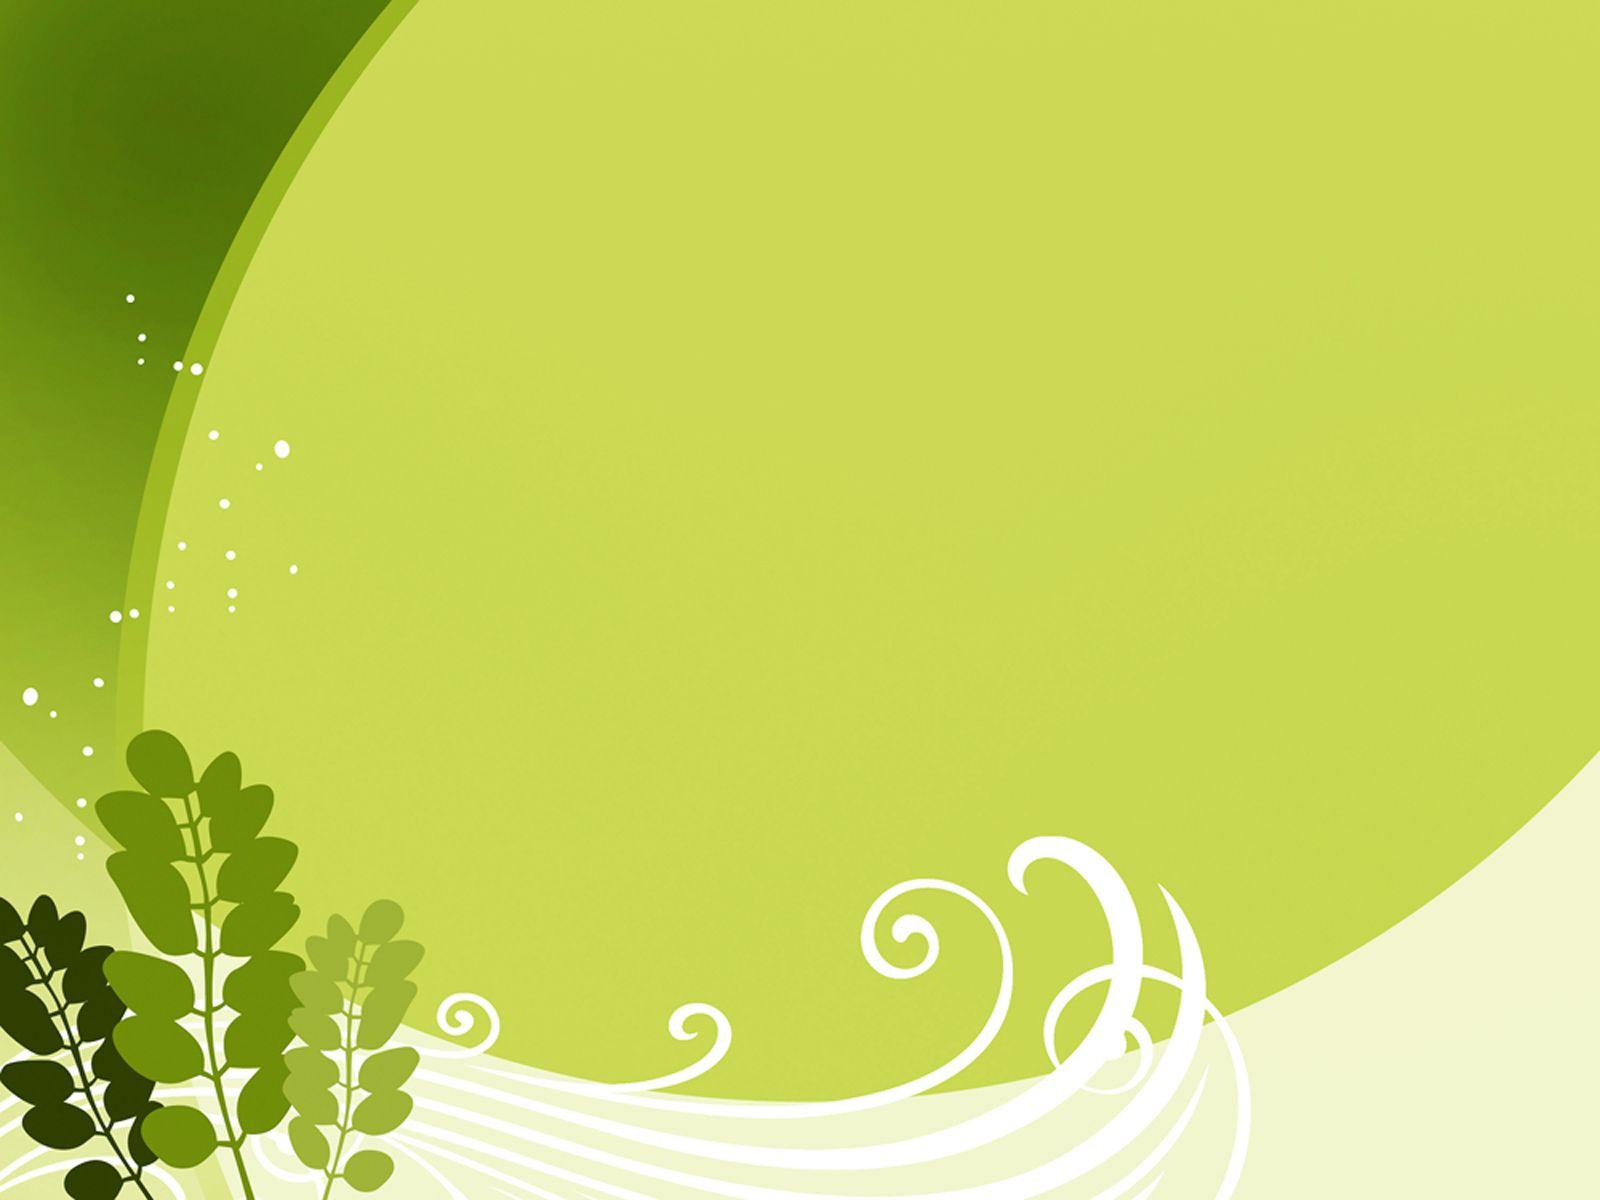 Leaf Green Free PPT Background for your PowerPoint